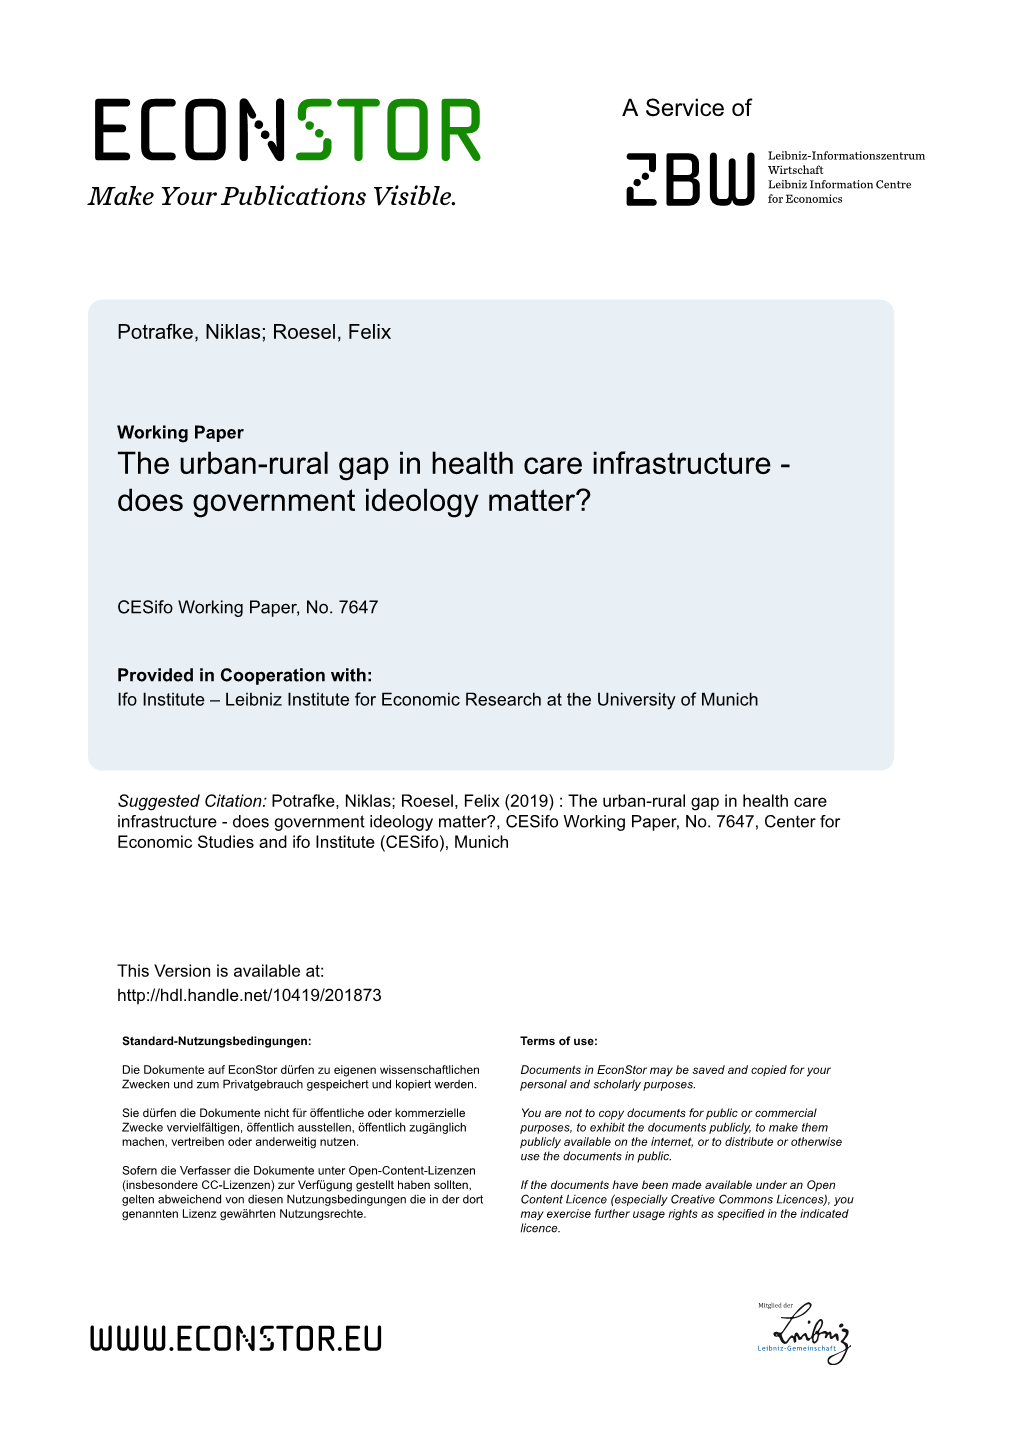 The Urban-Rural Gap in Health Care Infrastructure - Does Government Ideology Matter?